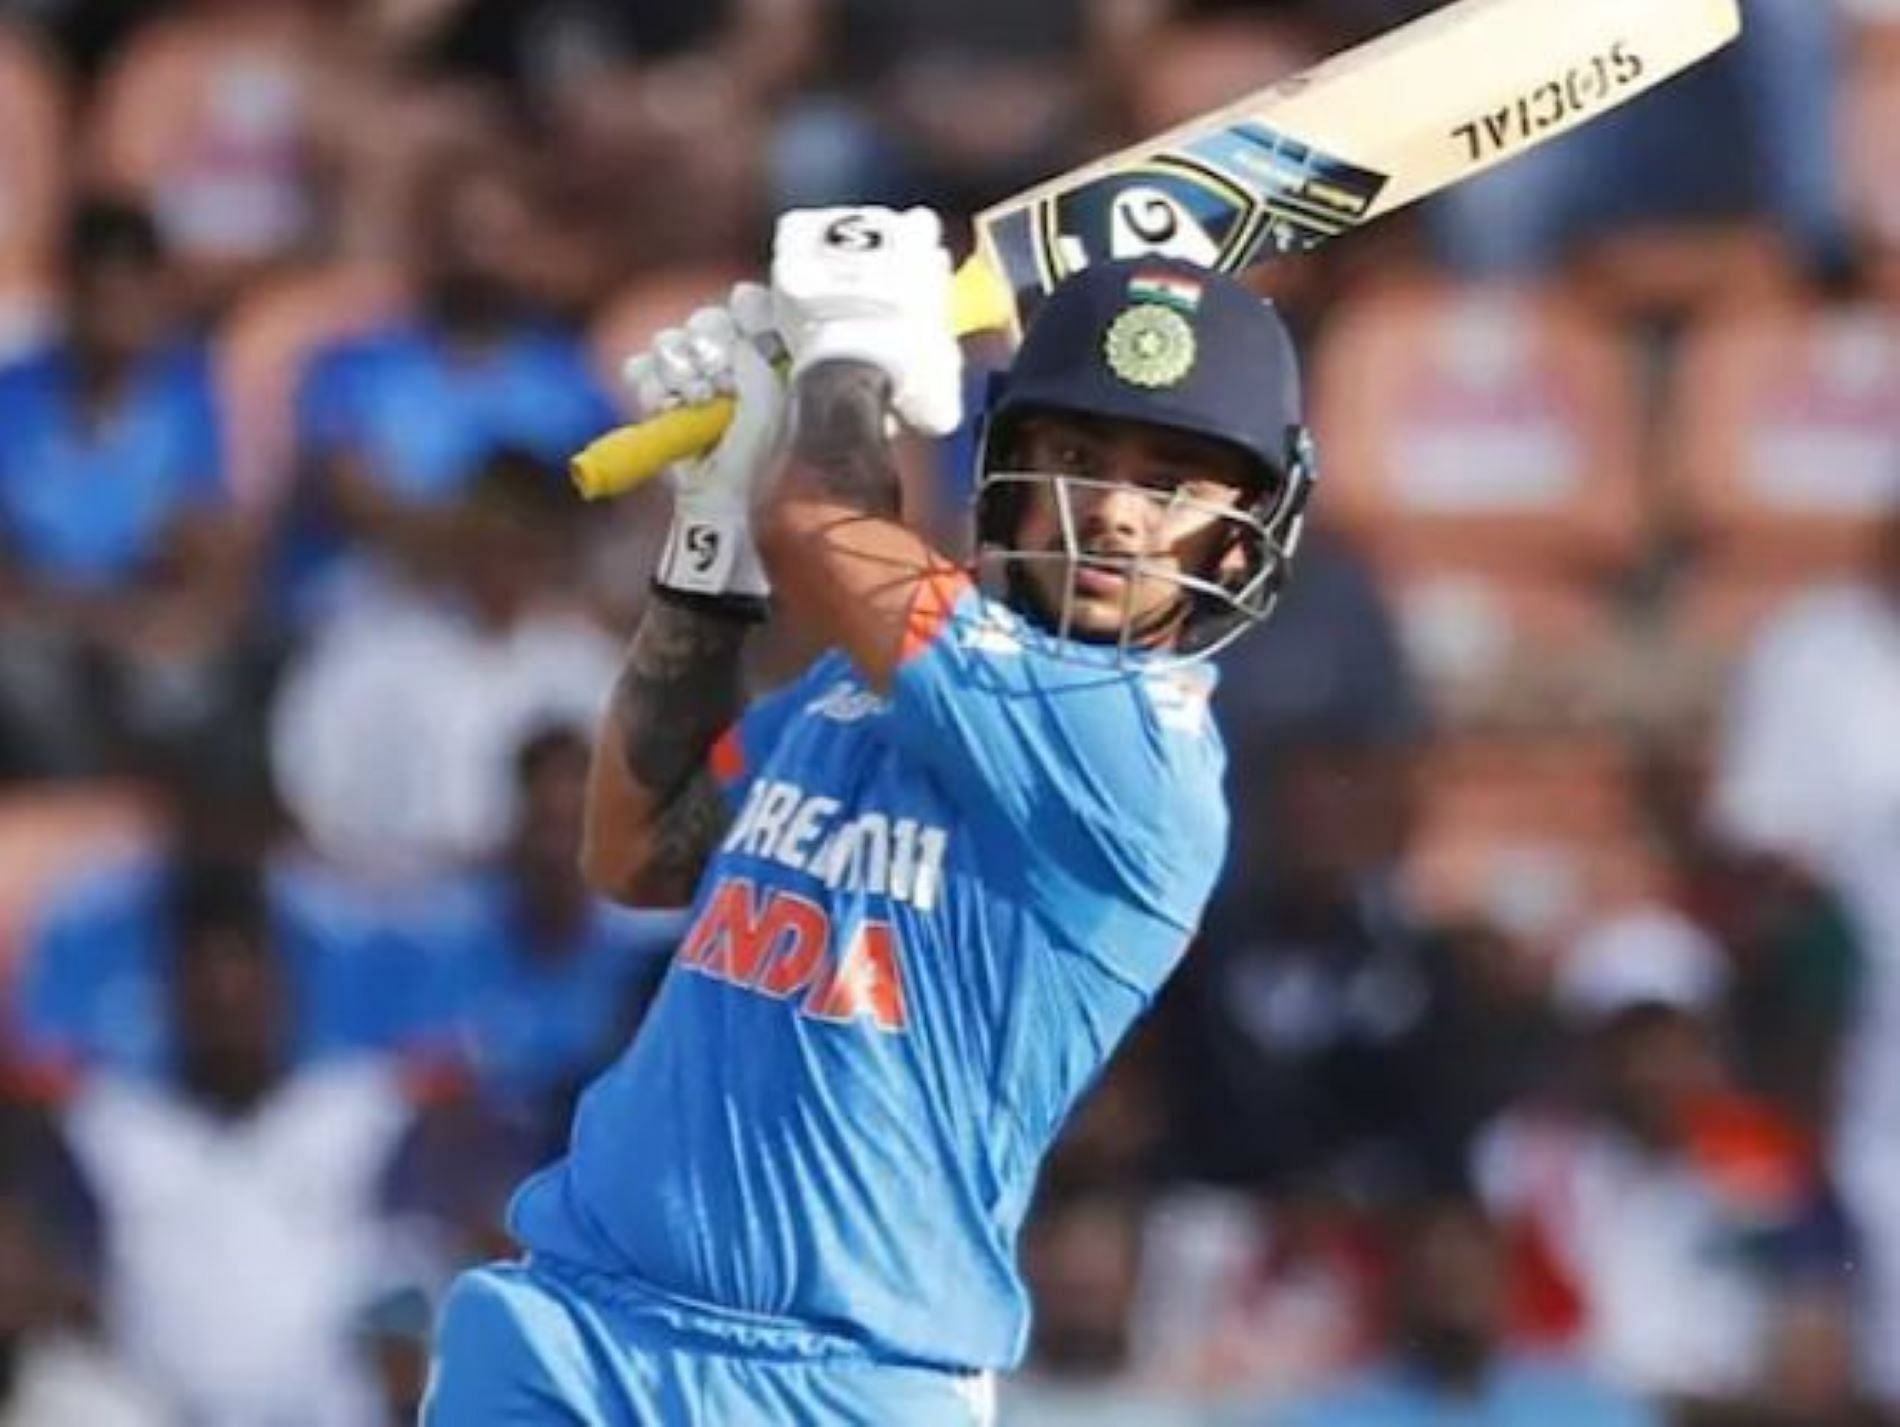 Kishan opened the batting for India in the opening two games of the tournament